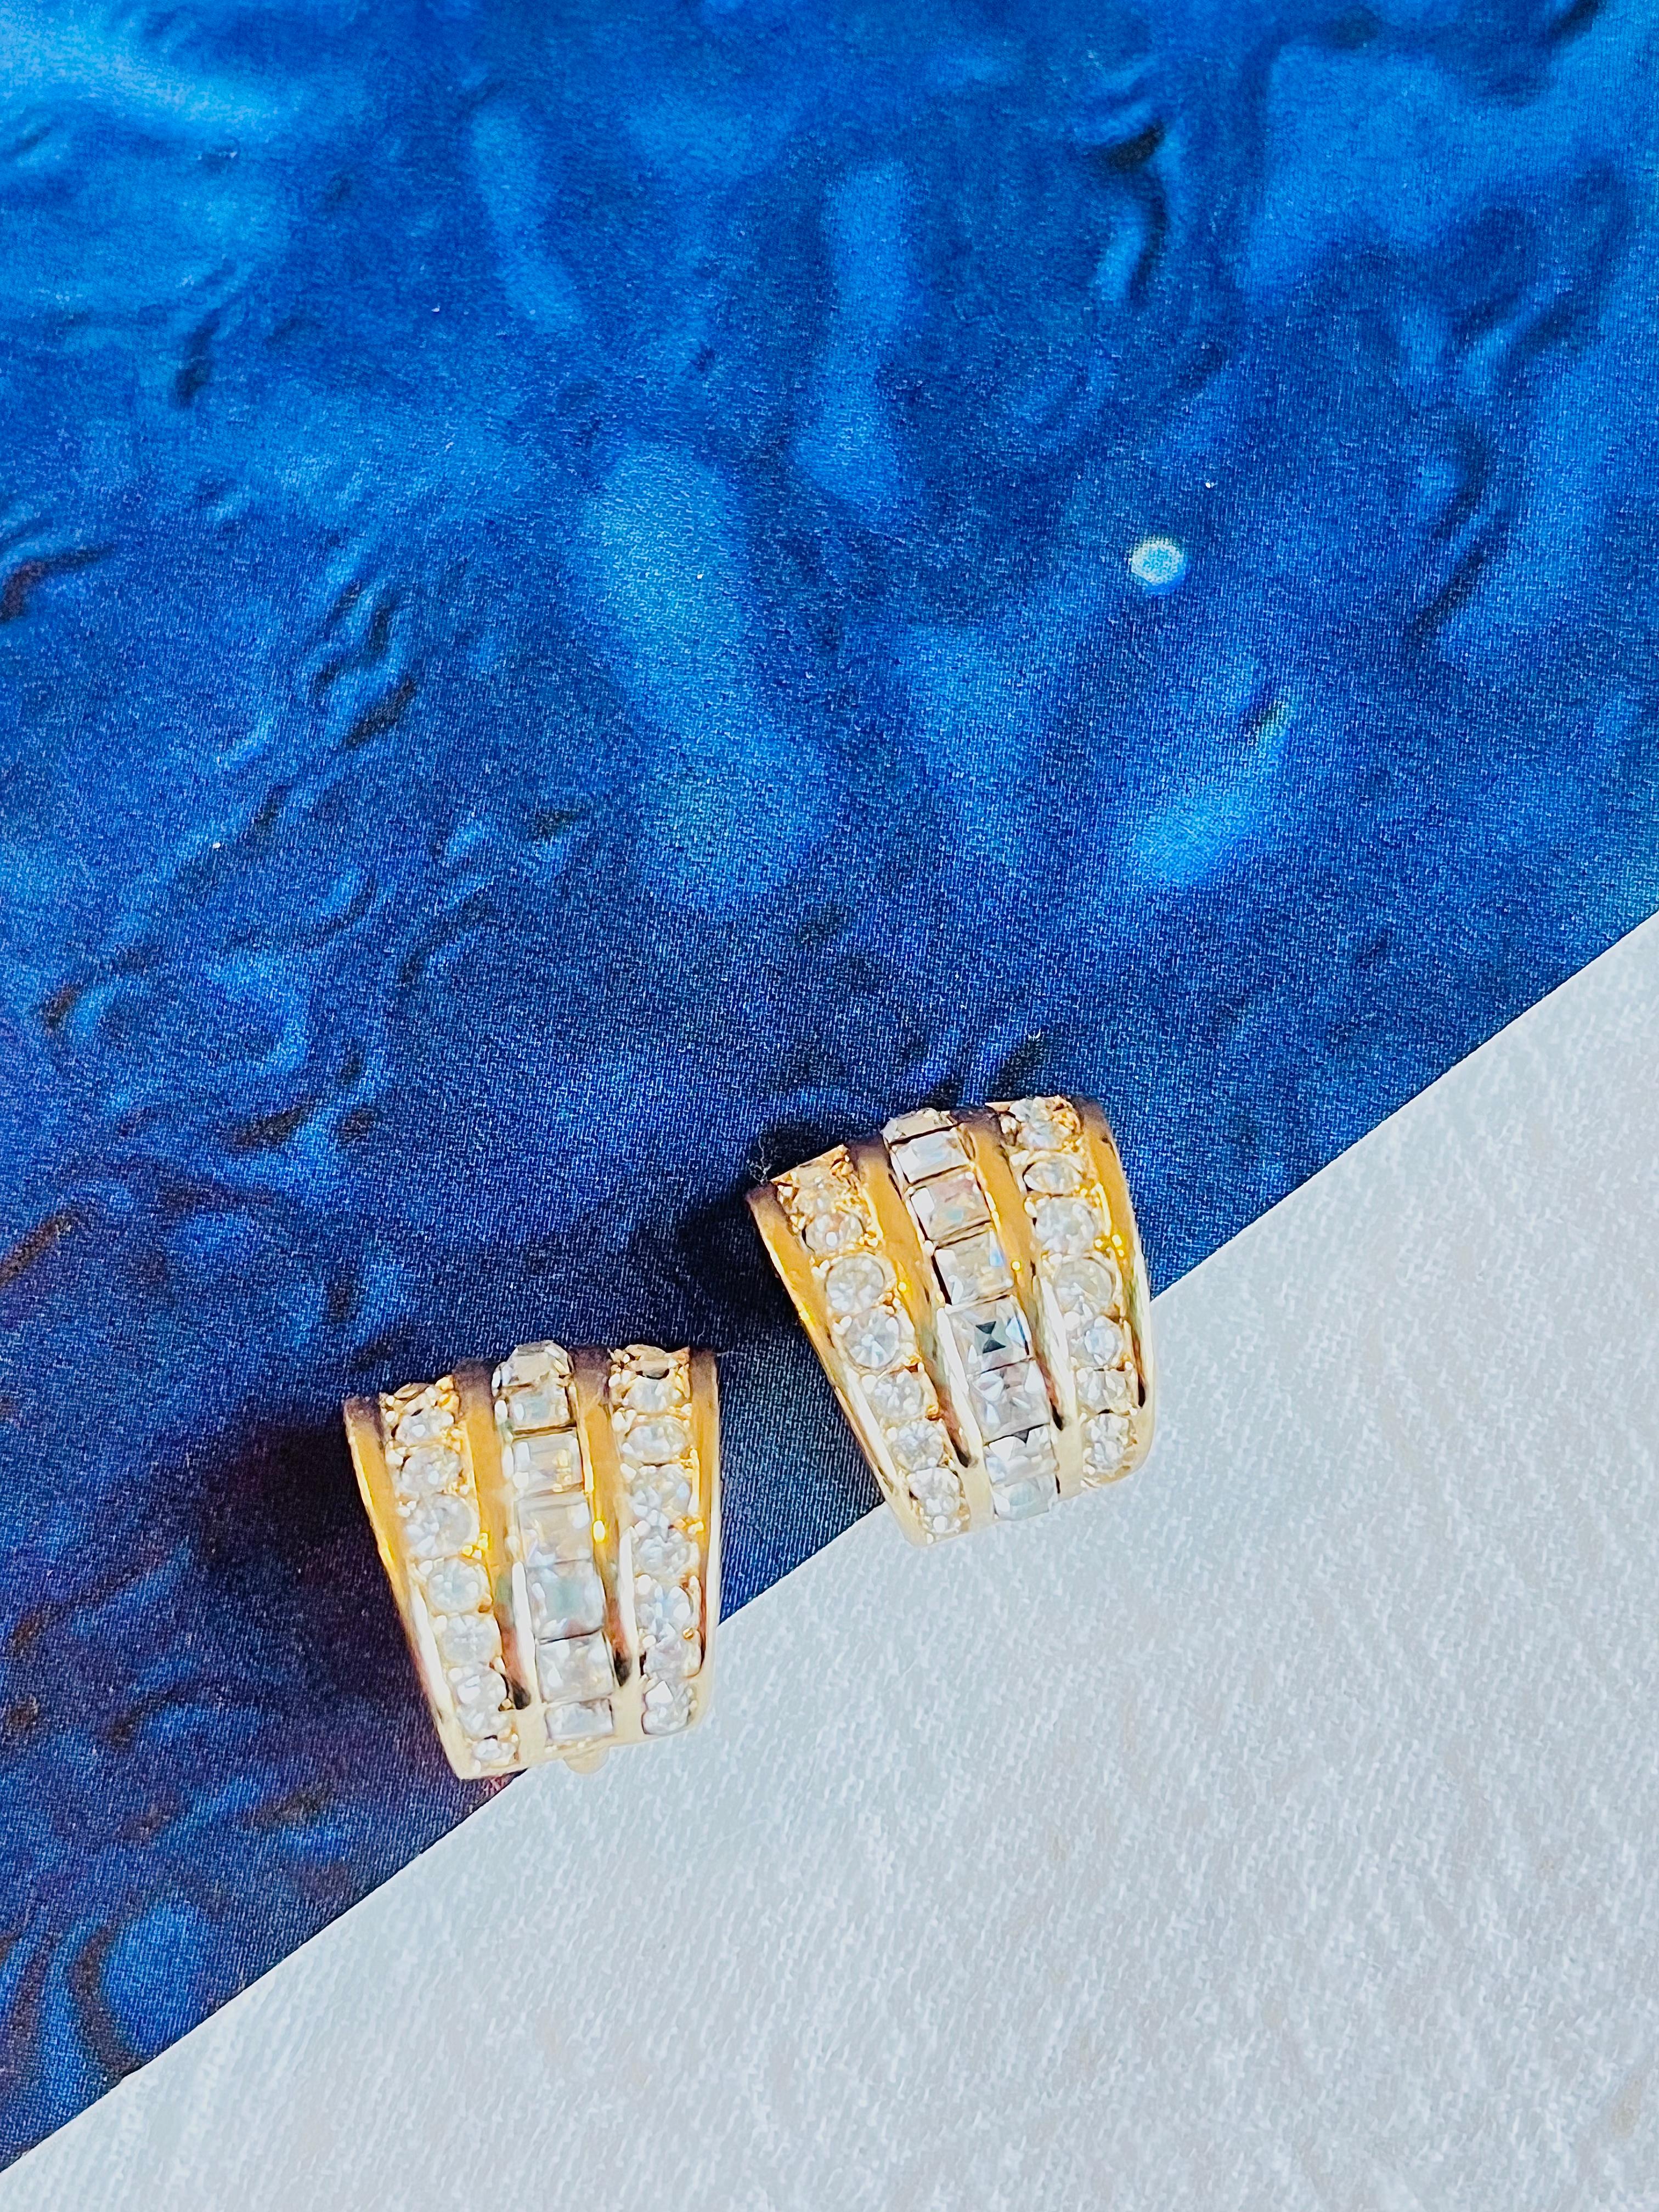 Renowned for its timeless elegant designs, Christian Dior presents this earrings. Crafted from polished gold plated brass, the piece is adorned with dazzling Swarovski crystal embellishments. Signed at the back. 100% Genuine.

Very good condition.